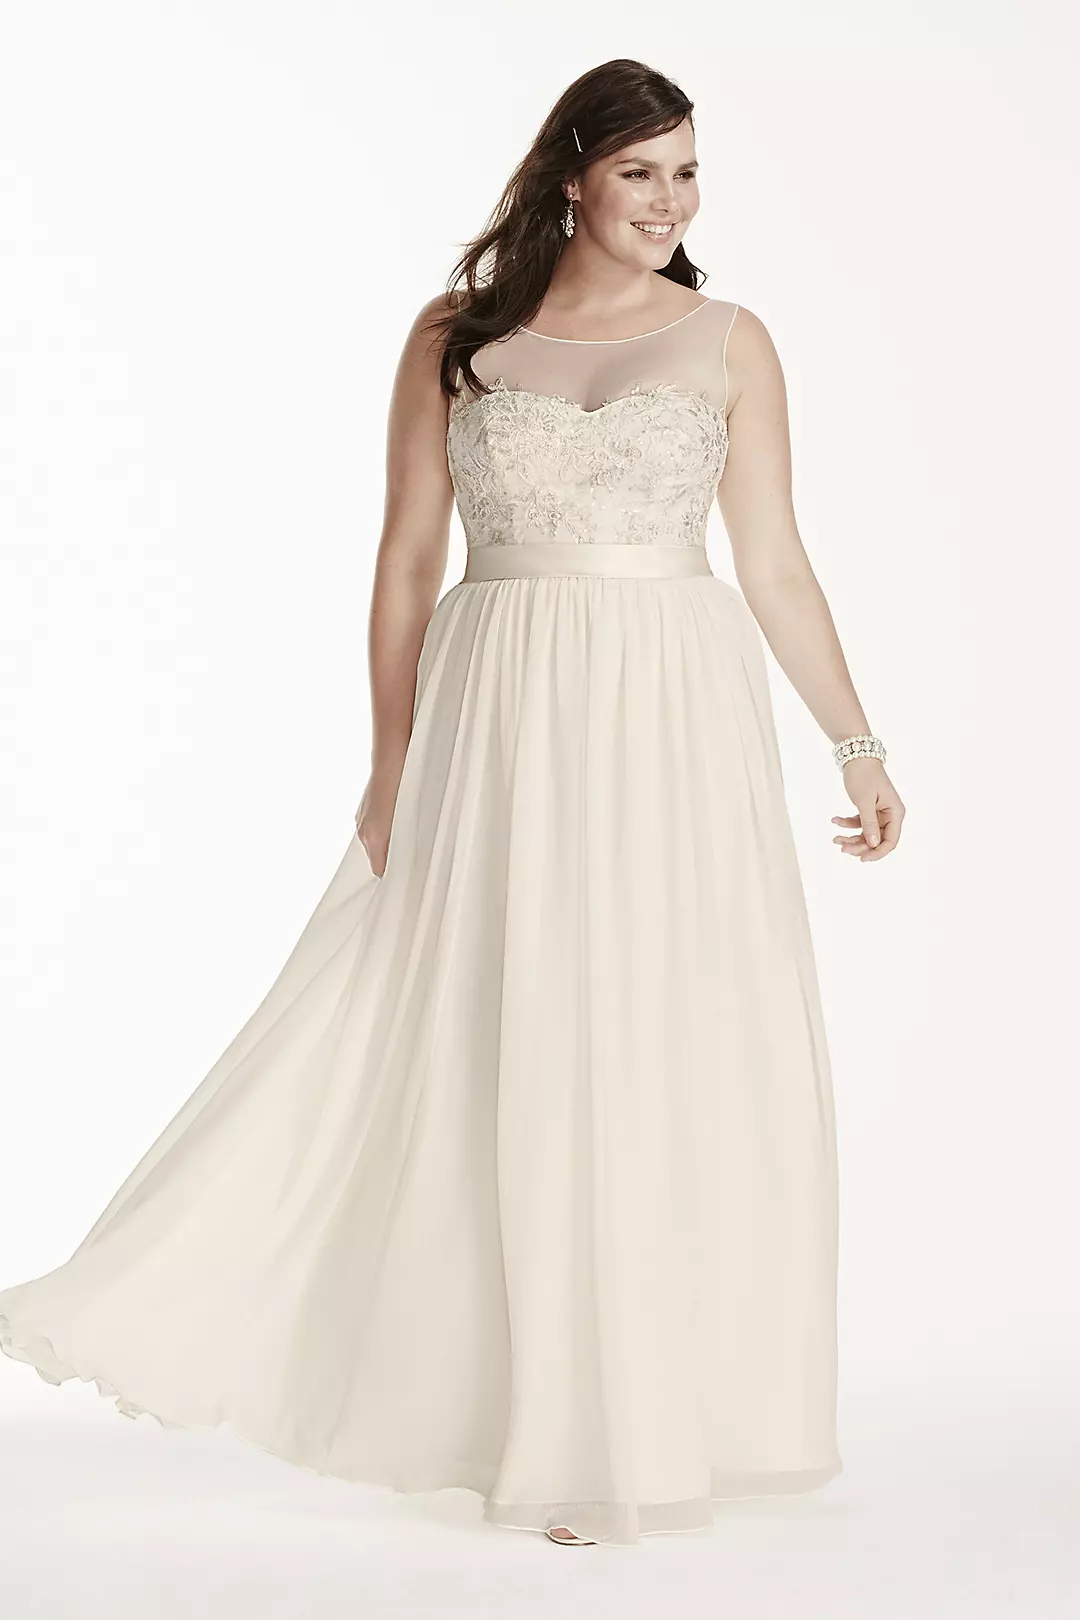 As-Is Tank Plus Size Wedding Dress with Applique Image